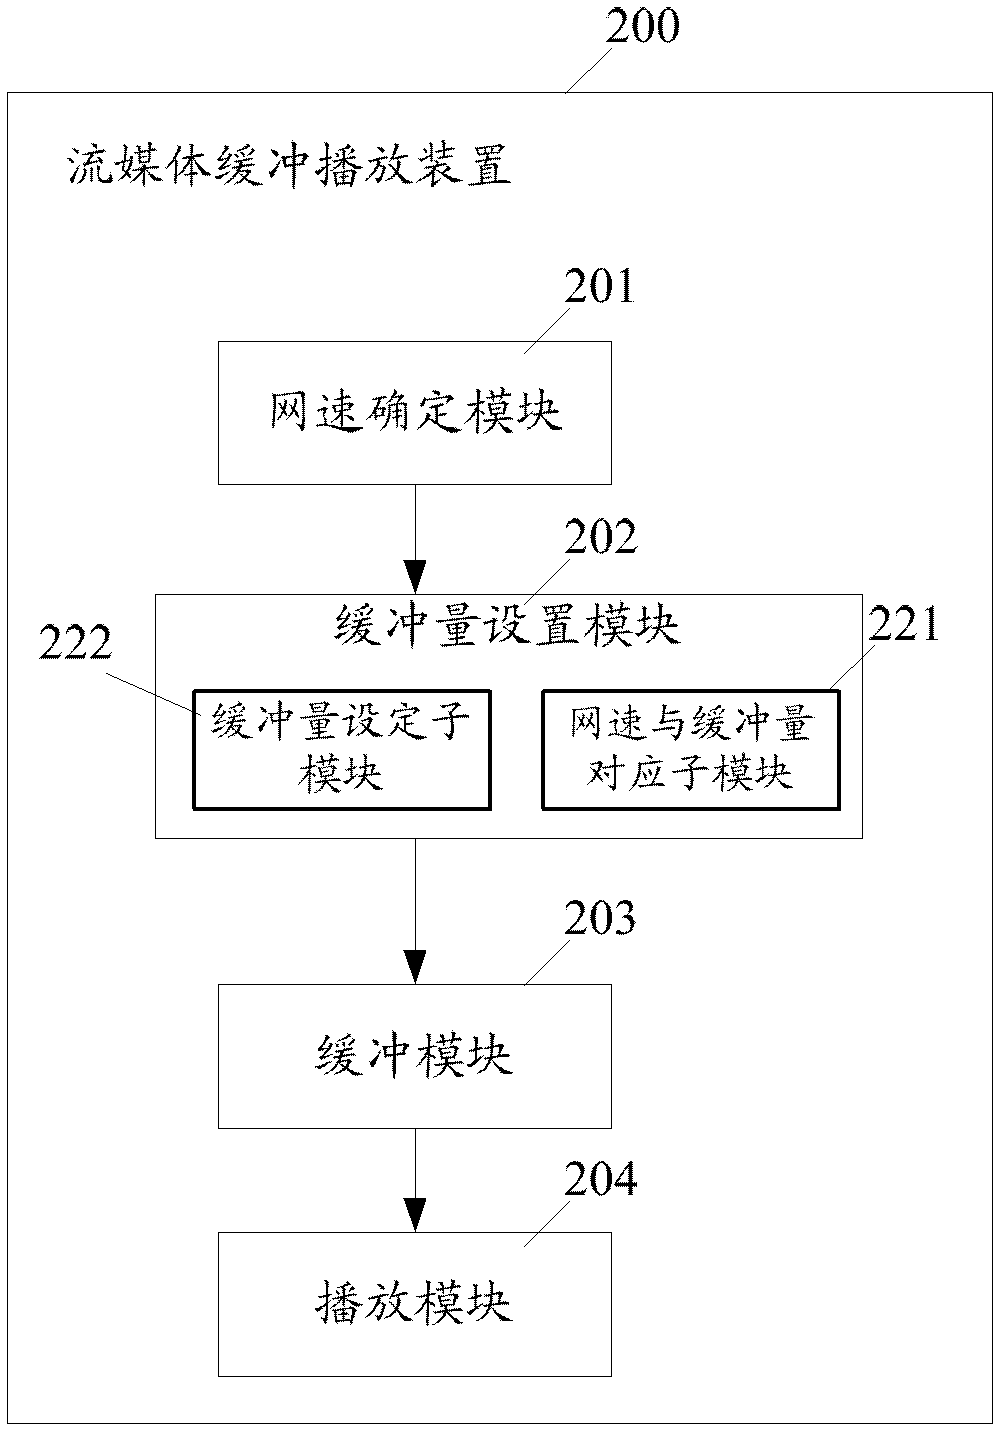 Streaming media buffer play method and apparatus